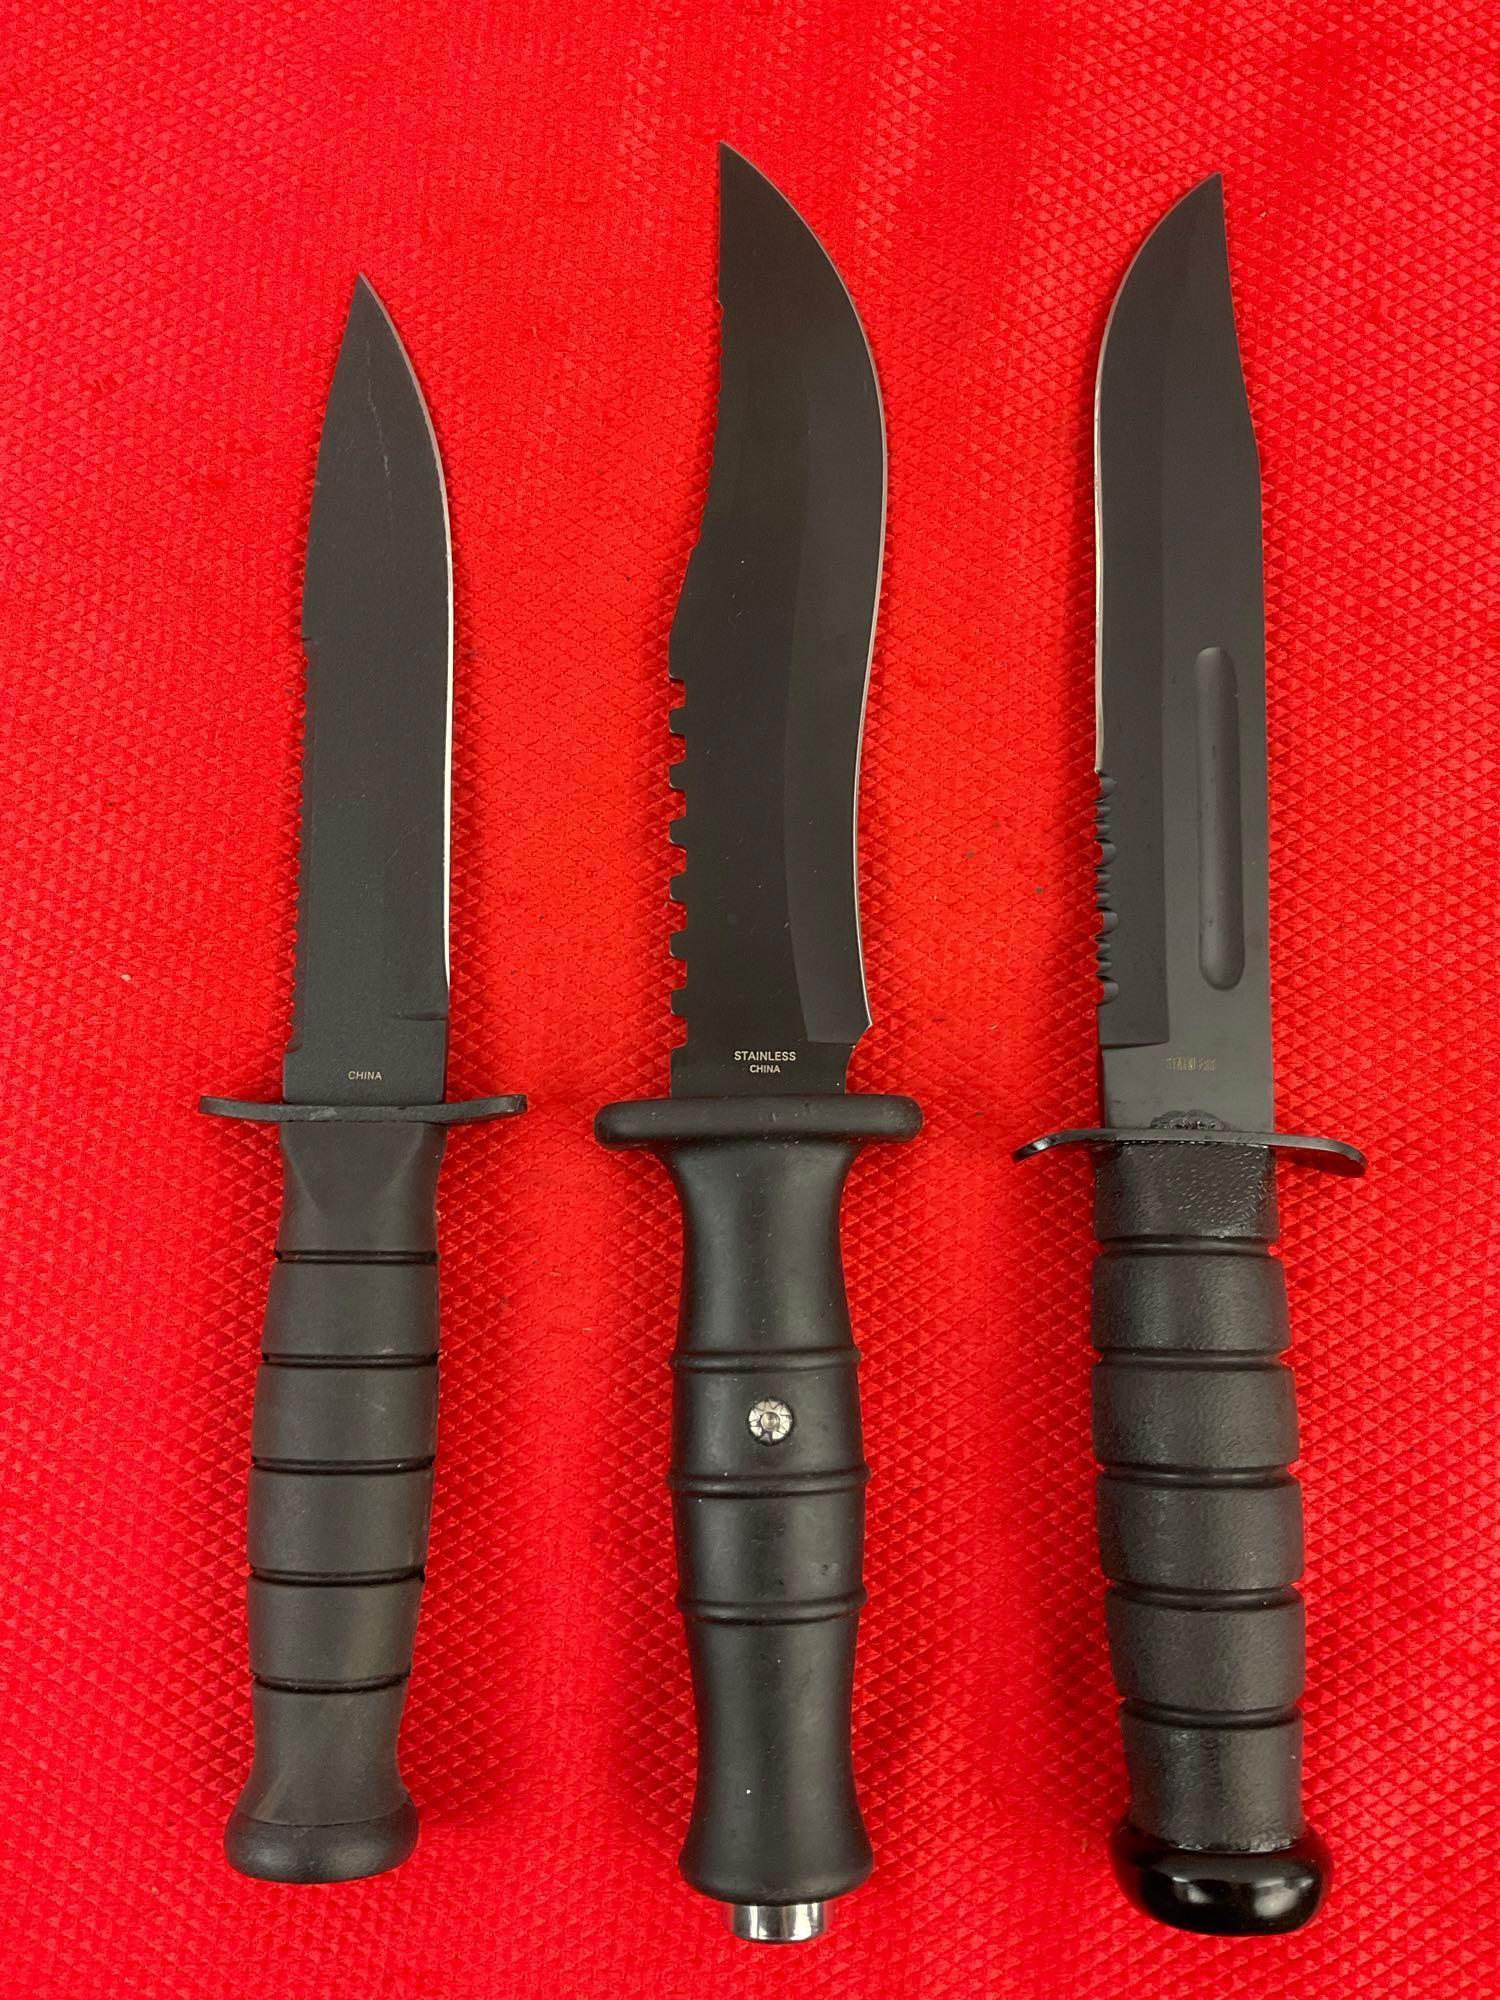 3 pcs Modern Steel Fixed Blade Tactical Knives w/ Sheathes. 1x Survivor, 1x D.O.T.T., 1x Unknown.